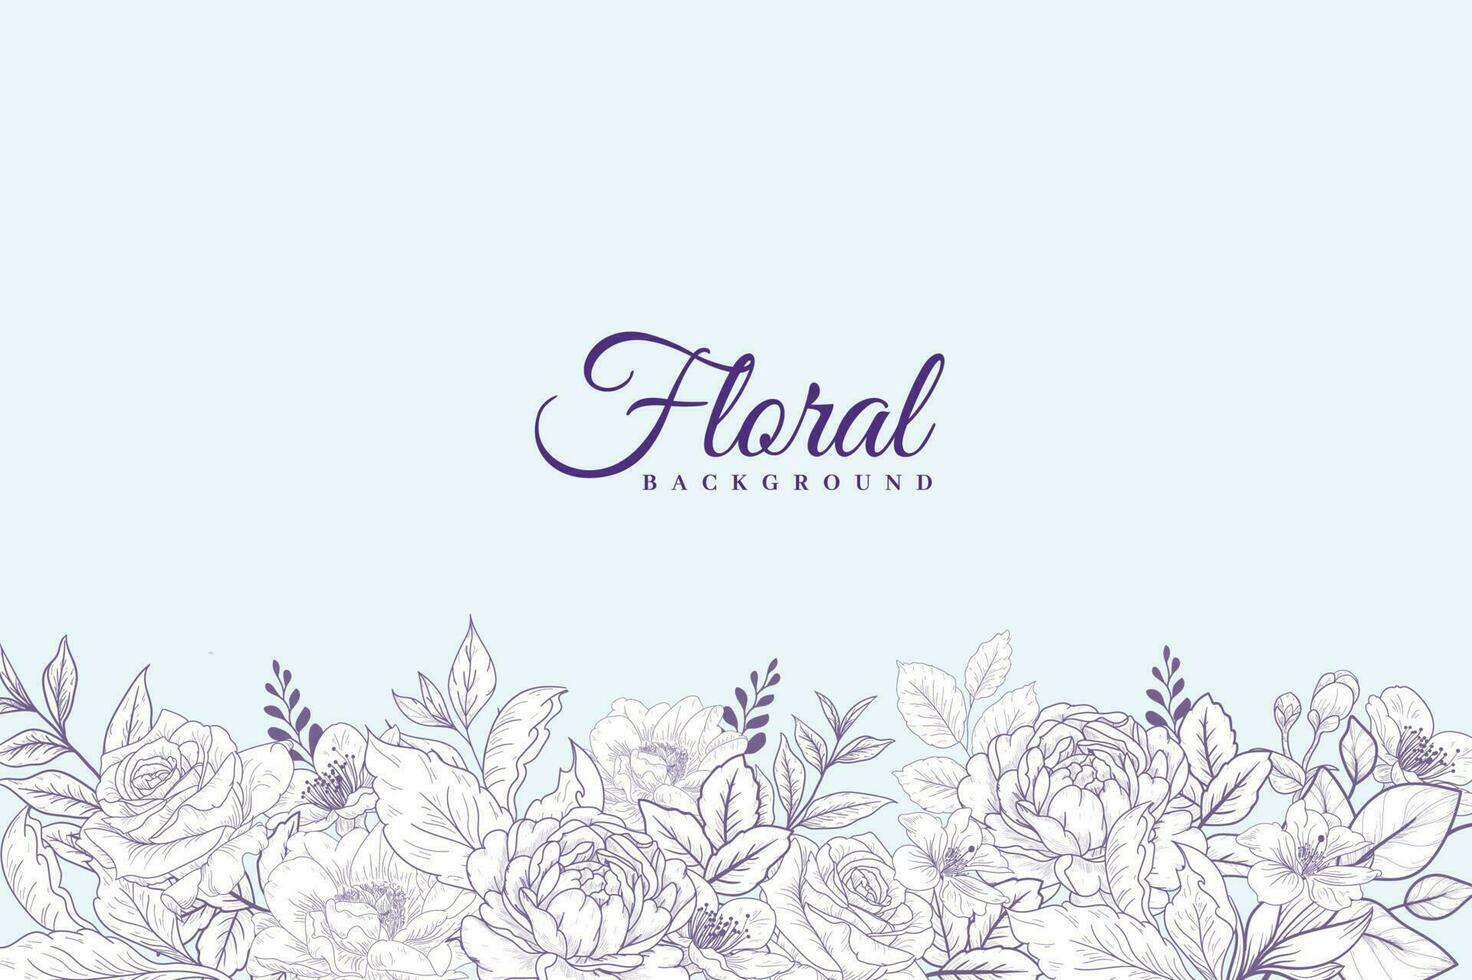 Vintage Background with Hand Drawn Floral Decoration vector